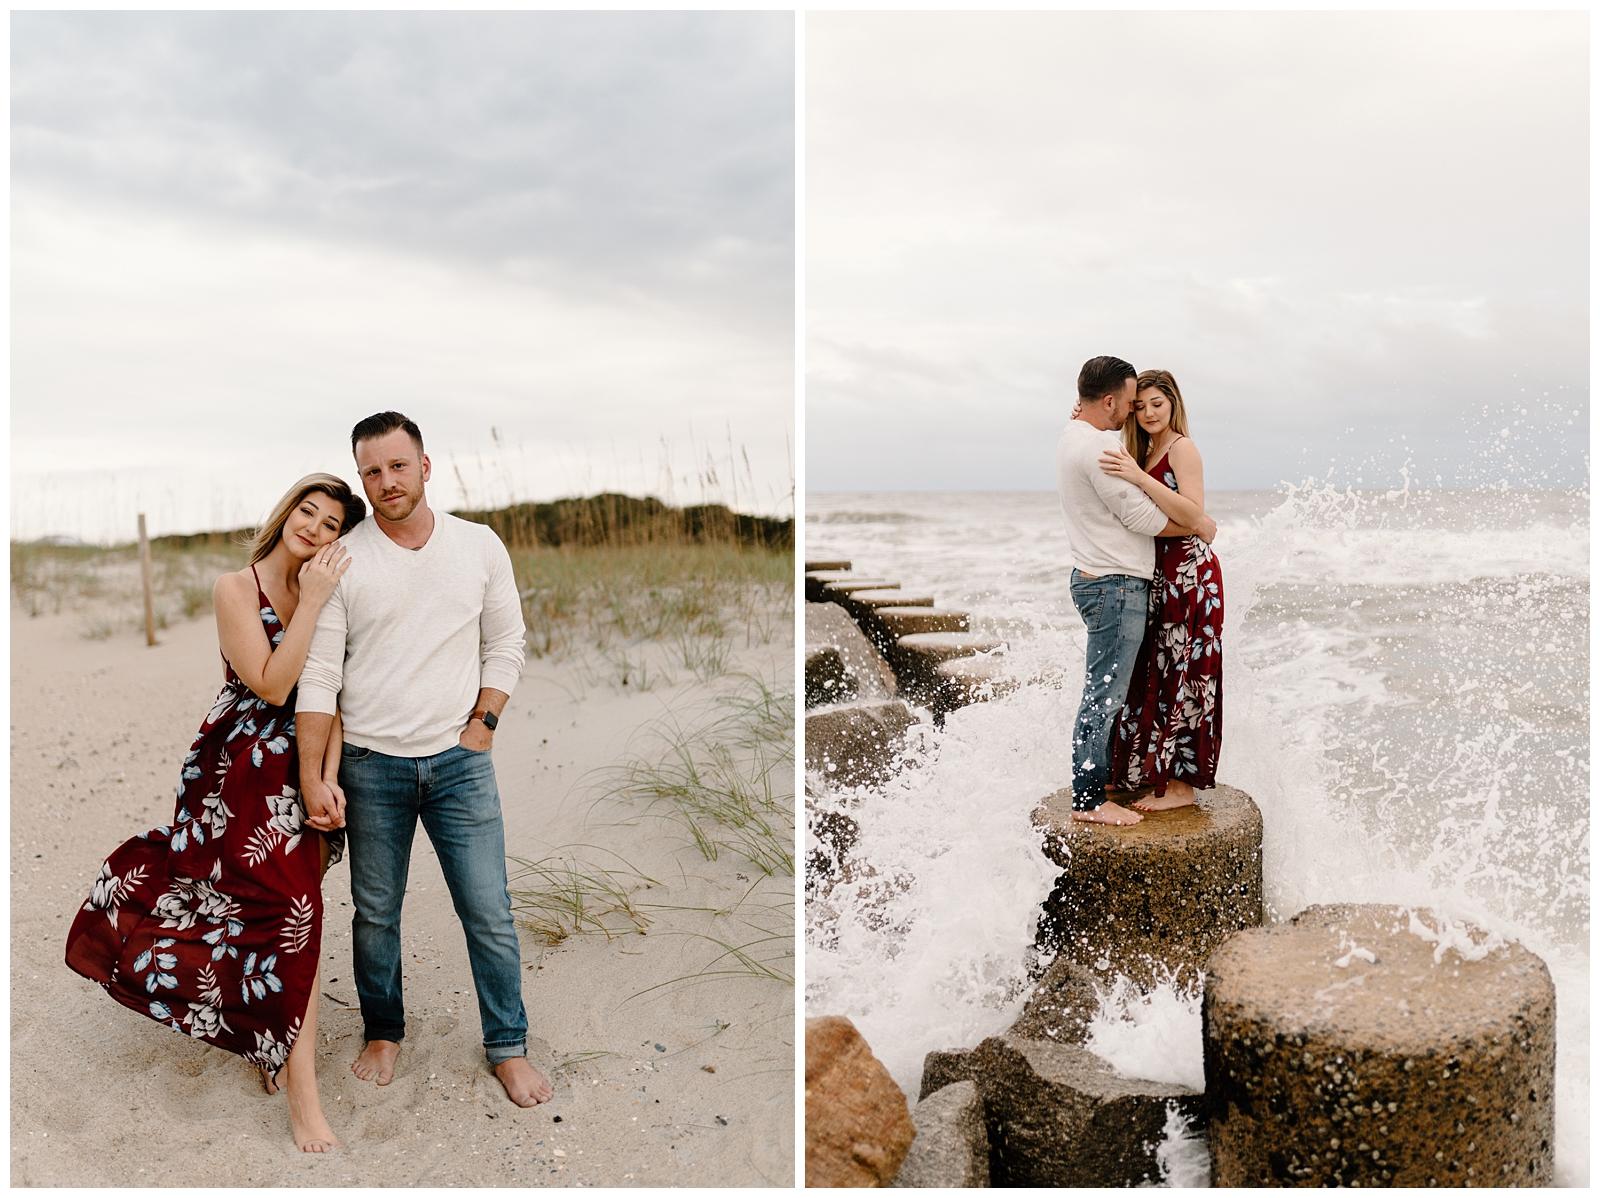 Choosing the beach for your engagement session